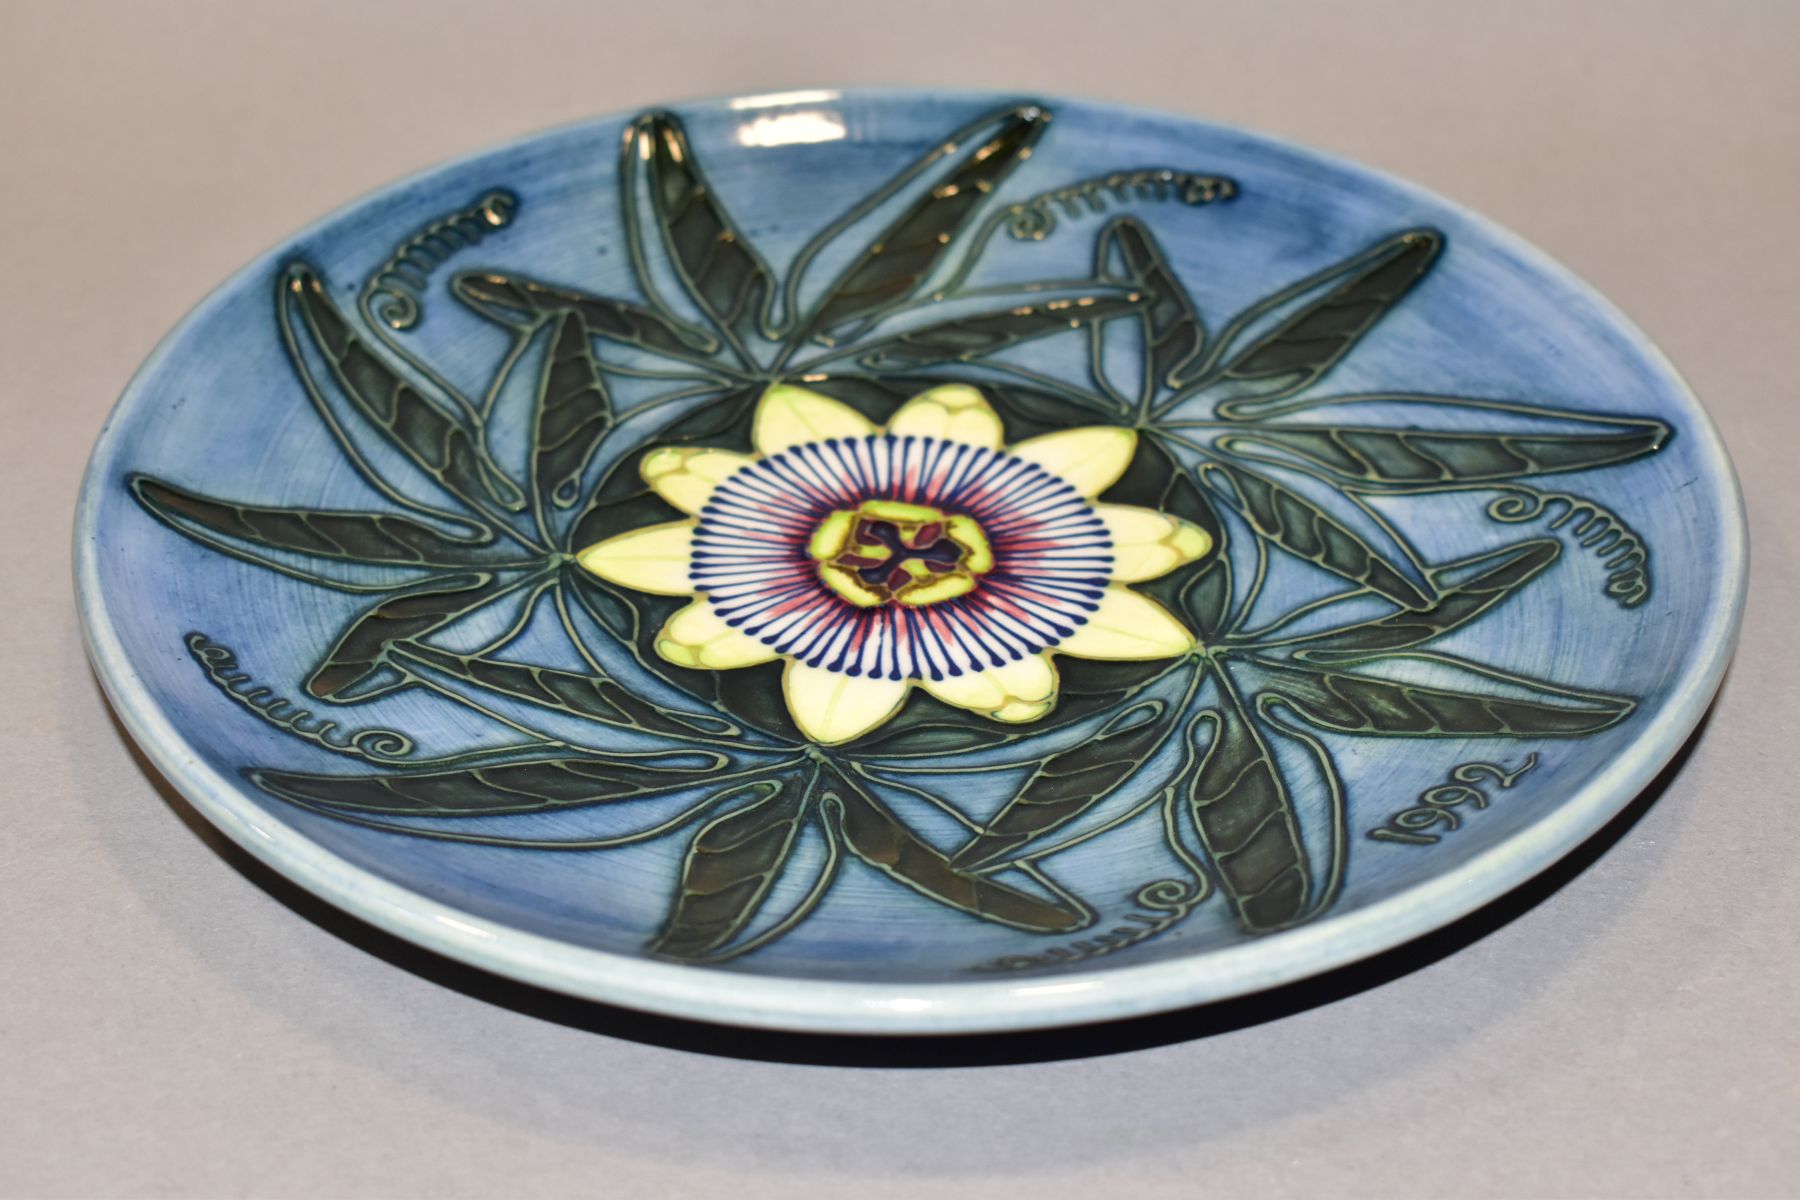 A MOORCROFT POTTERY LIMITED EDITION YEAR PLATE FOR 1992, second edition, passion flower design, - Image 3 of 4